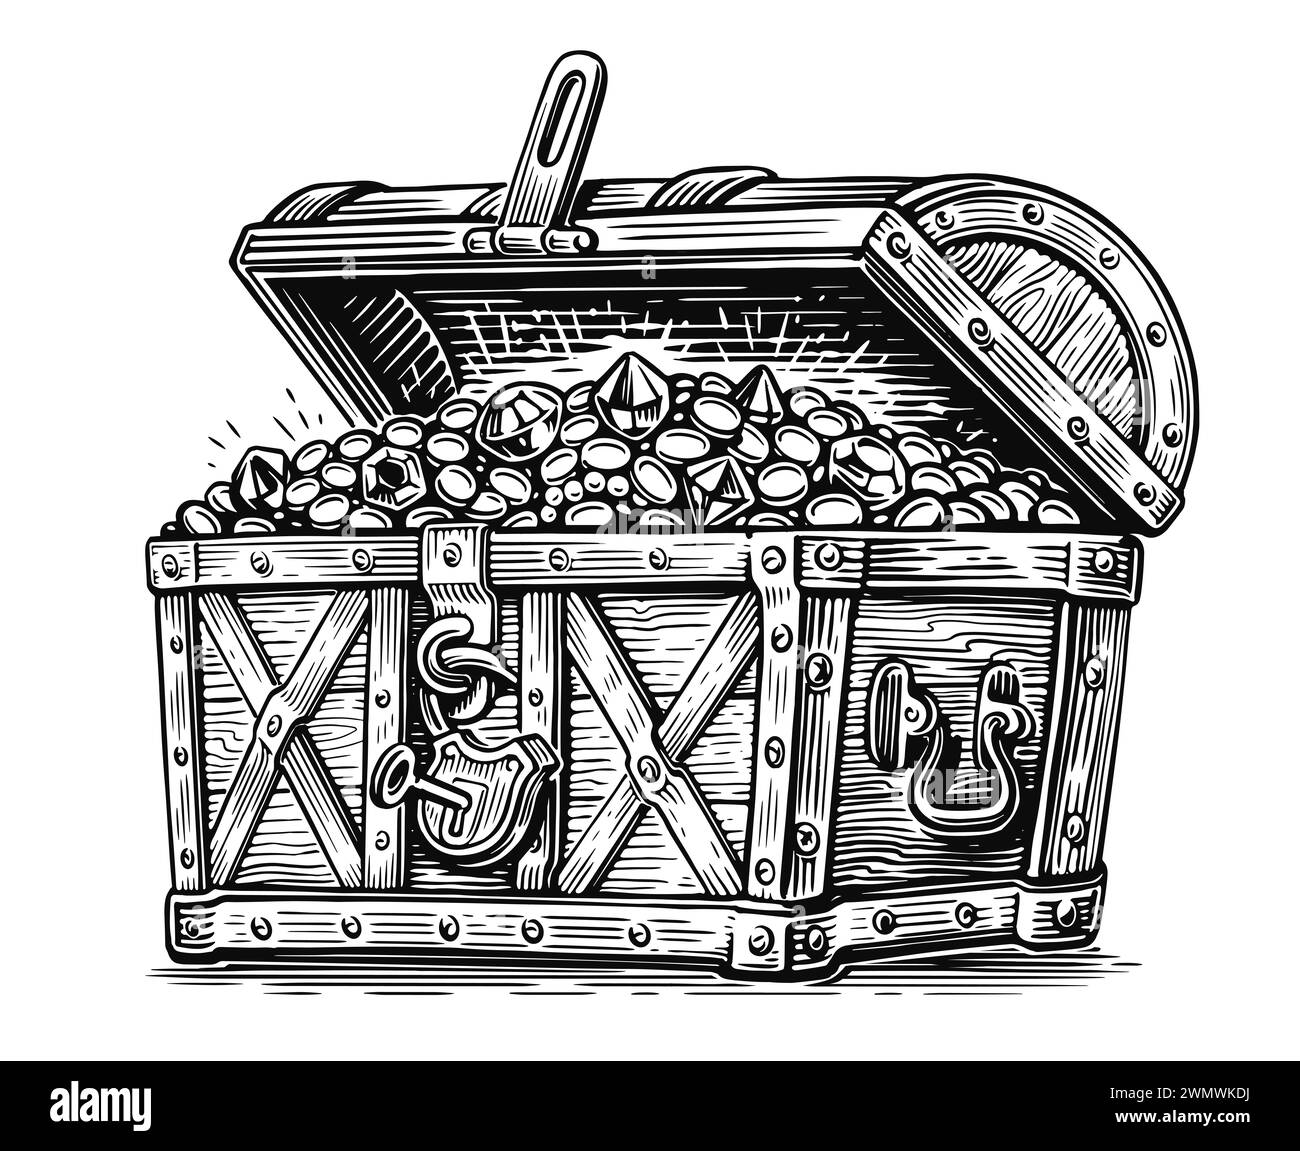 Treasure chest. Wealth of gold coins and precious stones. Hand drawn vntage sketch illustration Stock Photo